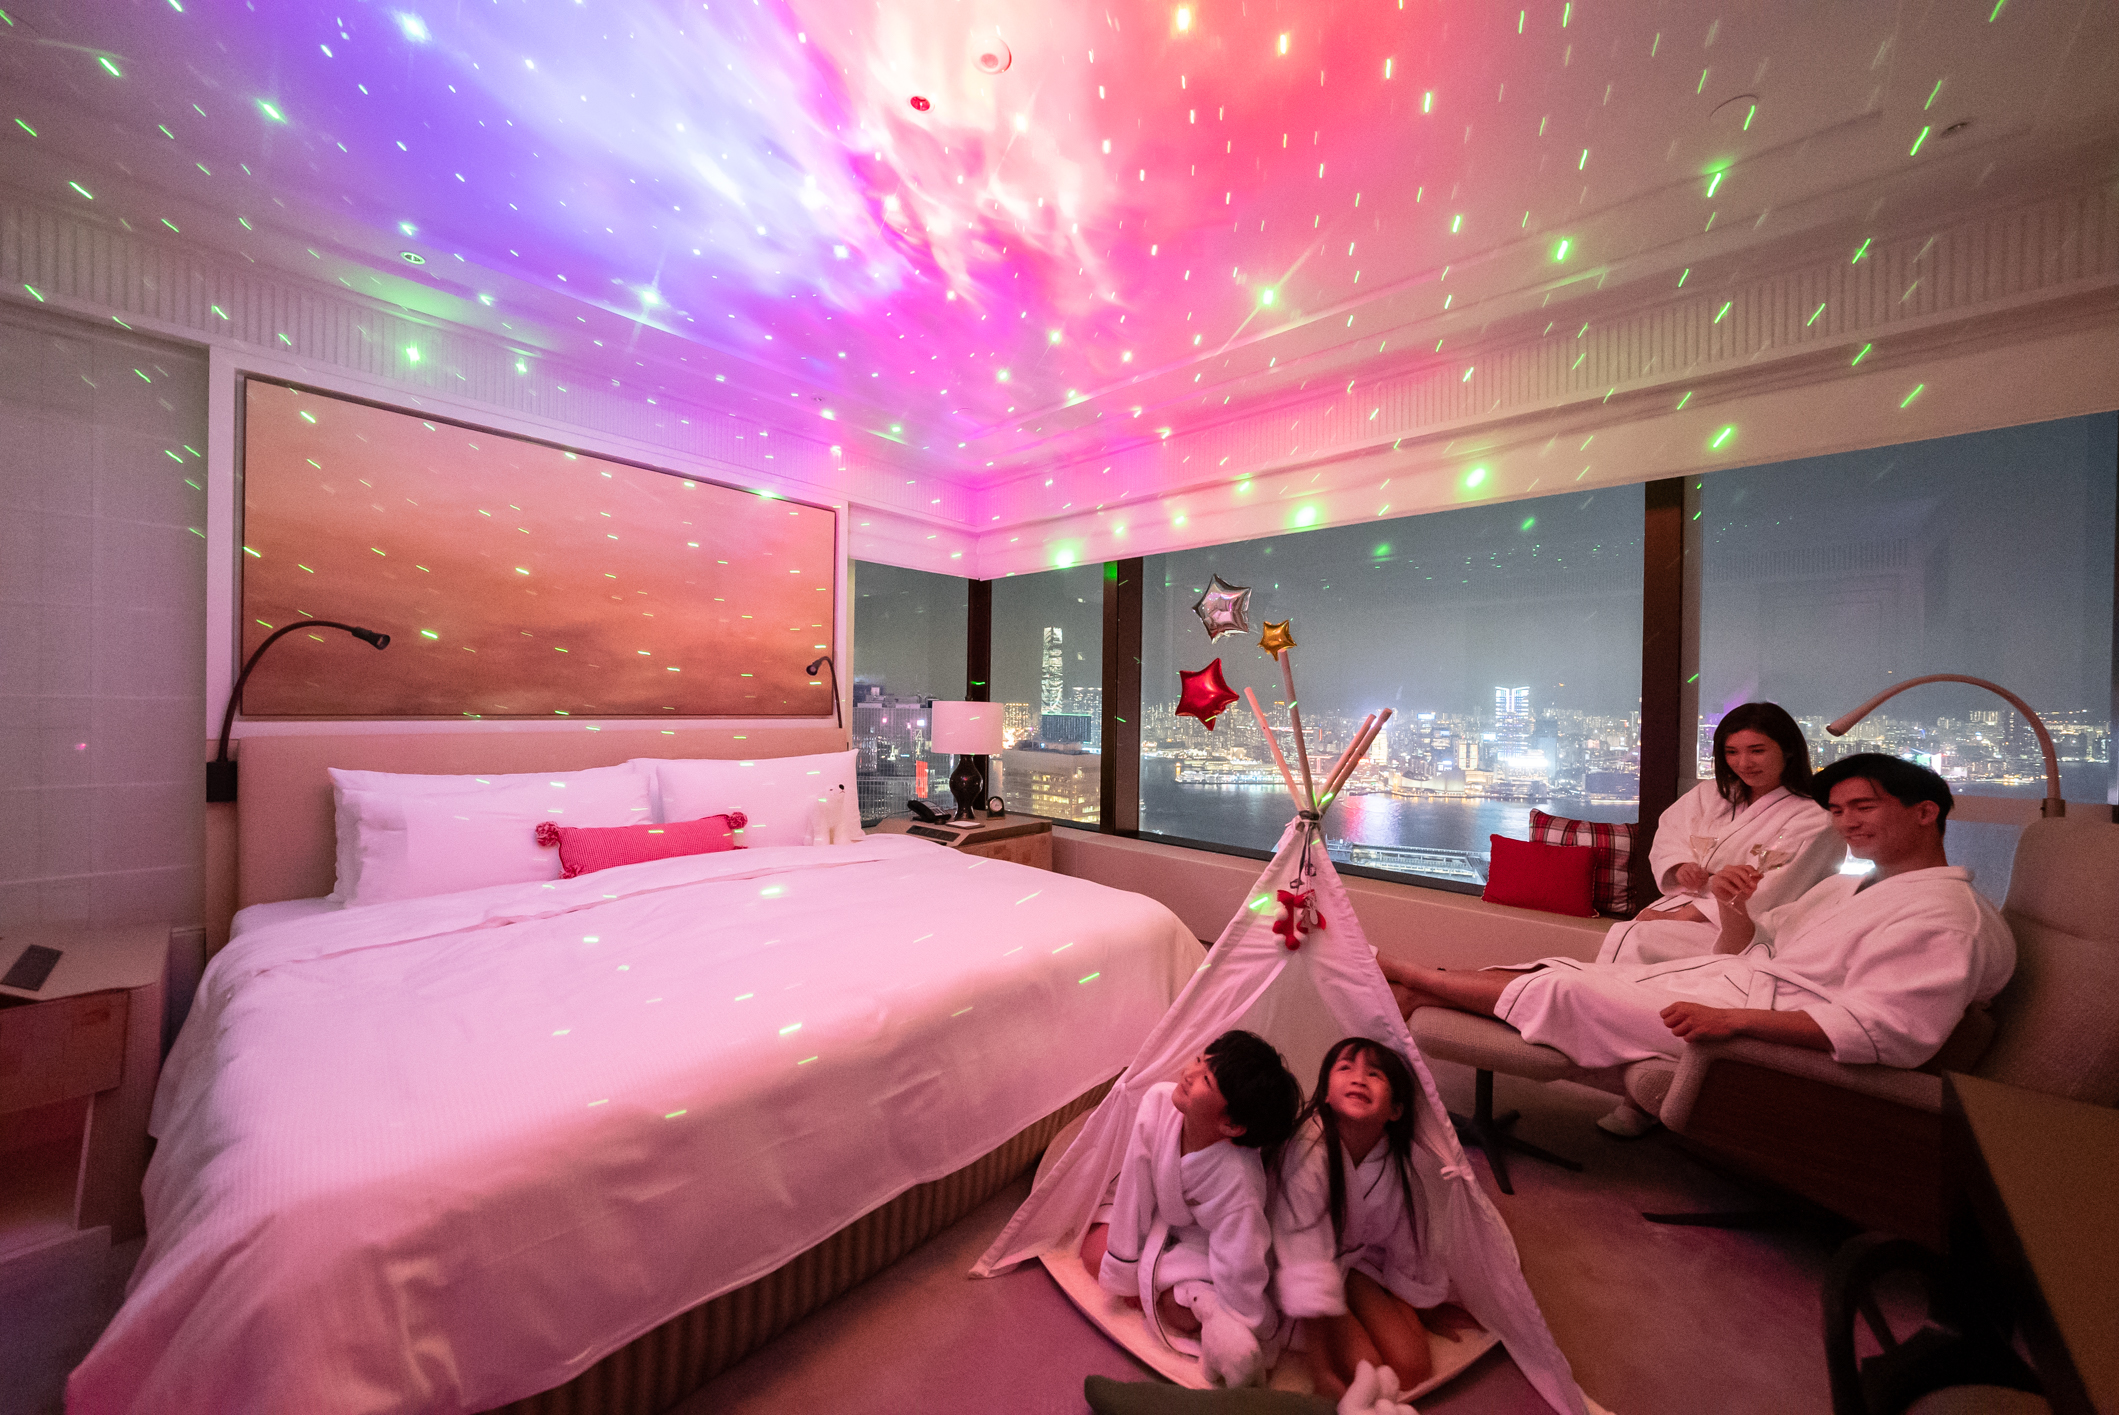 Northern Lights experience at Island Shangri-La’s enhanced guest rooms and suites